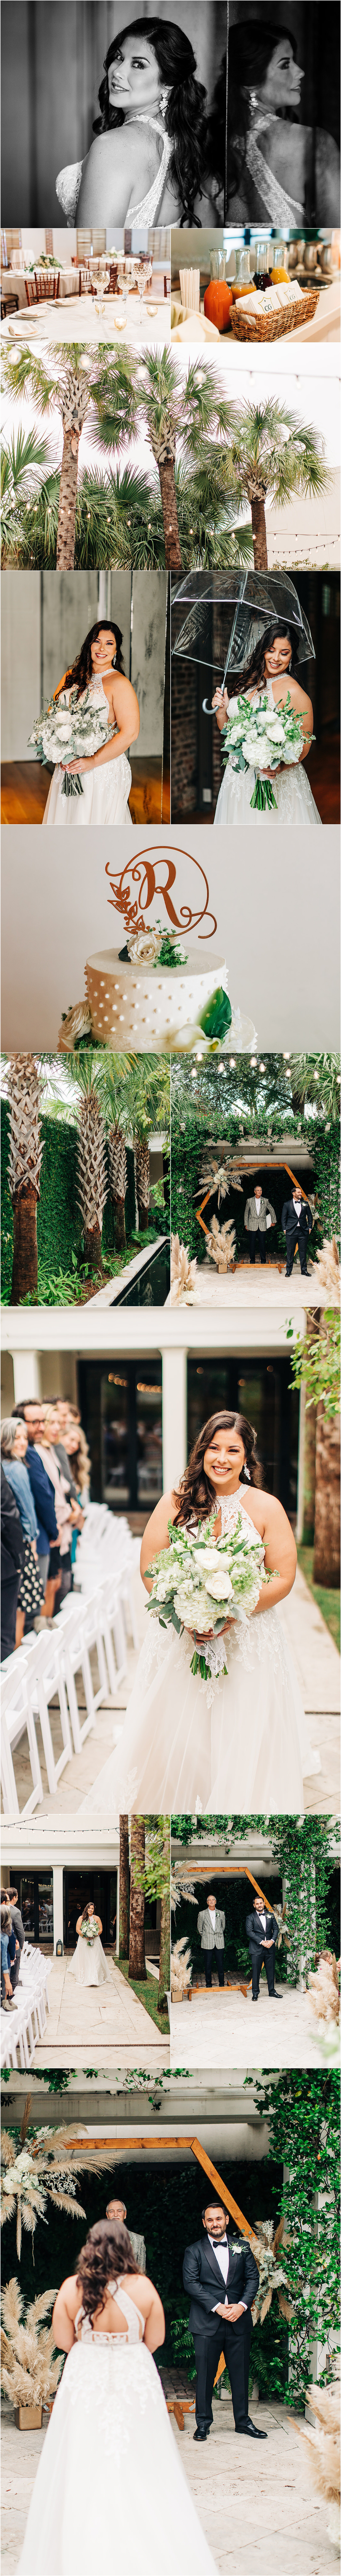 Stefany + Jared's Sunday Brunch Wedding at Cannon Green 